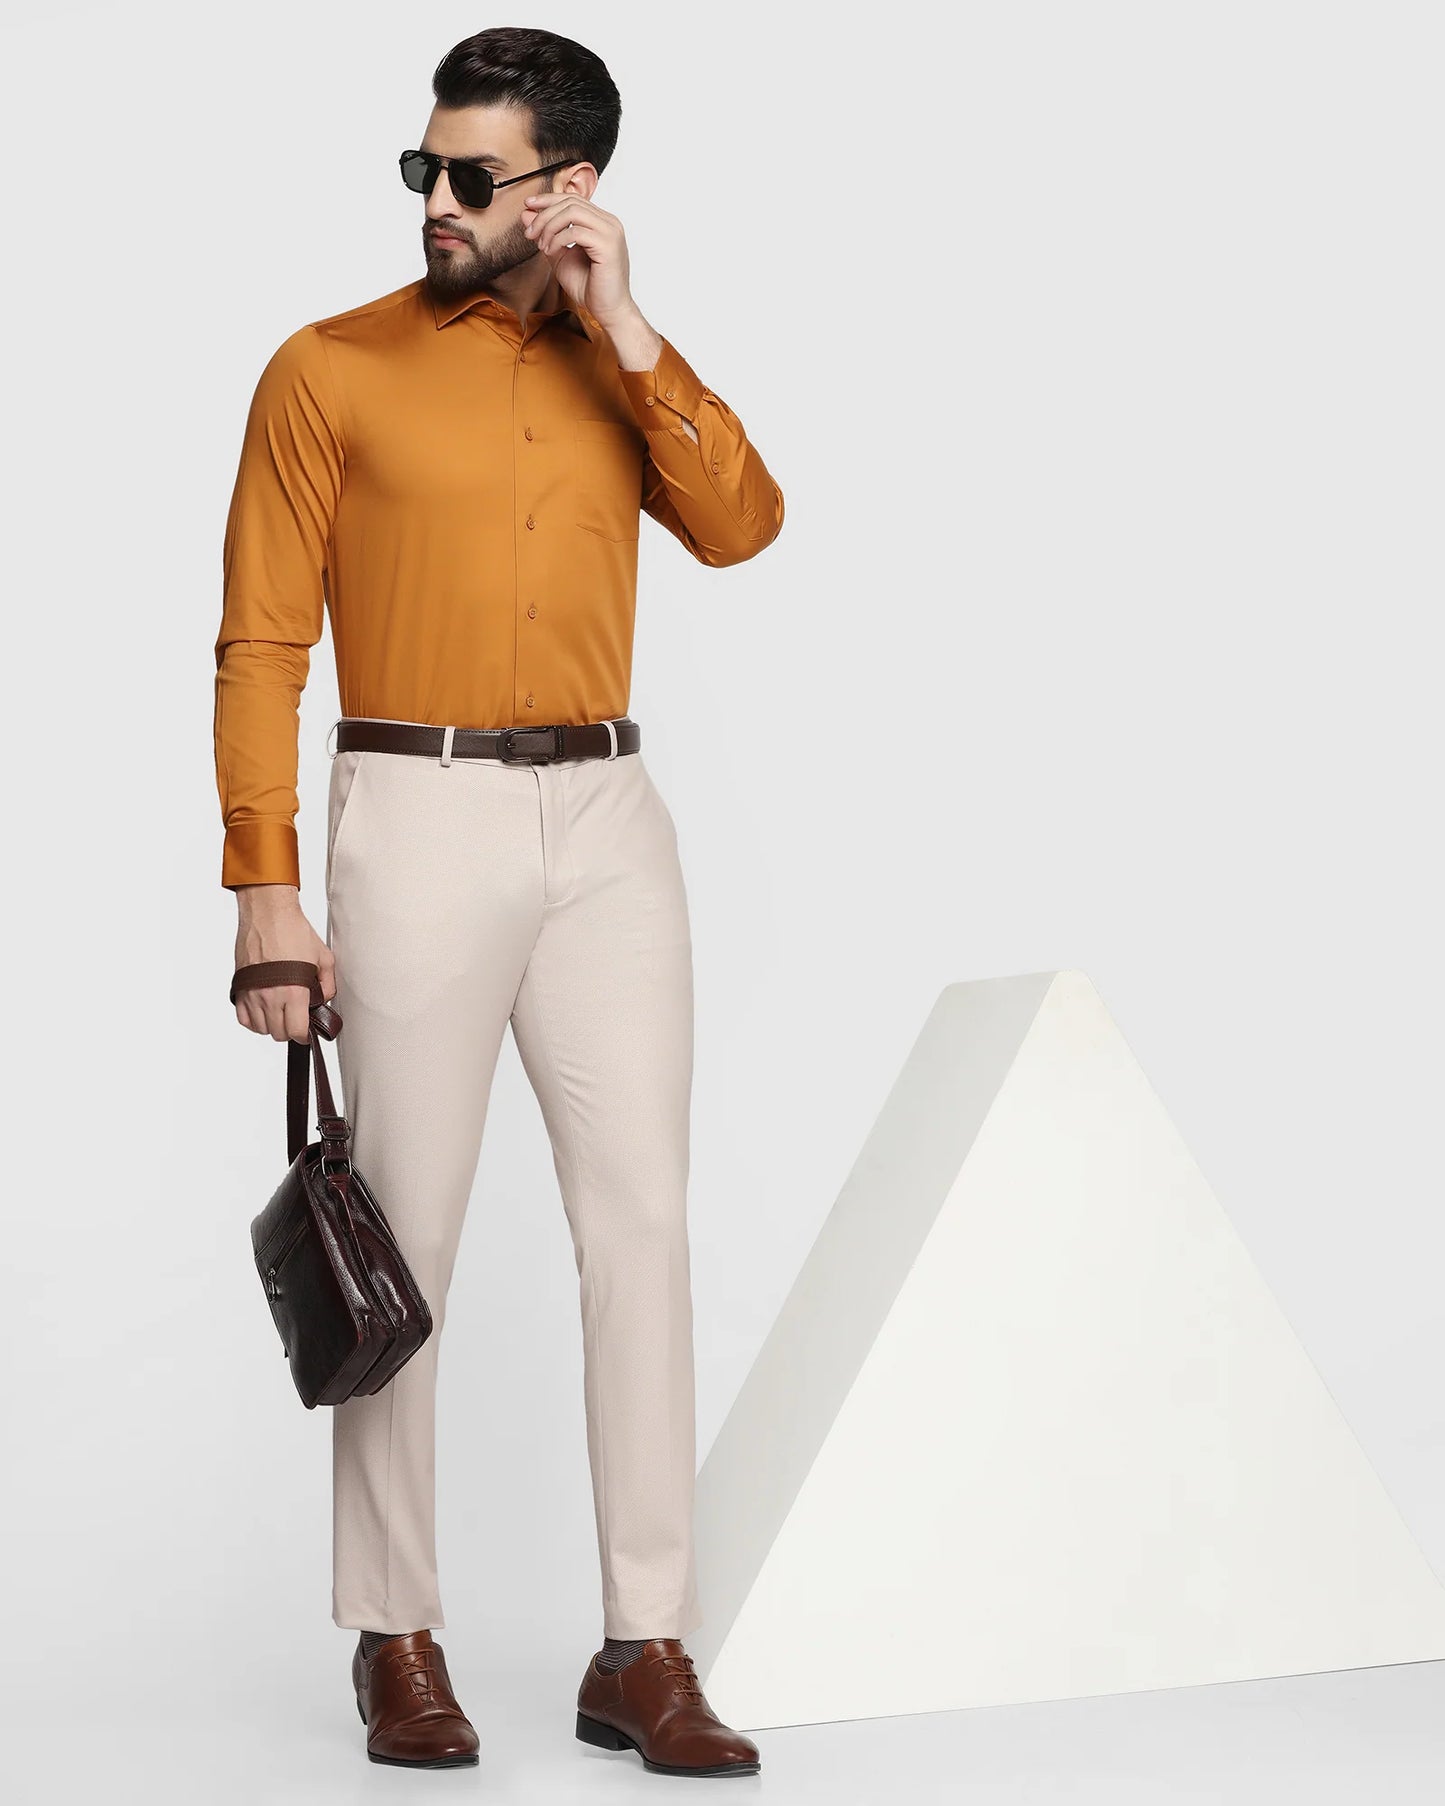 Solid formal shirt in fawn color